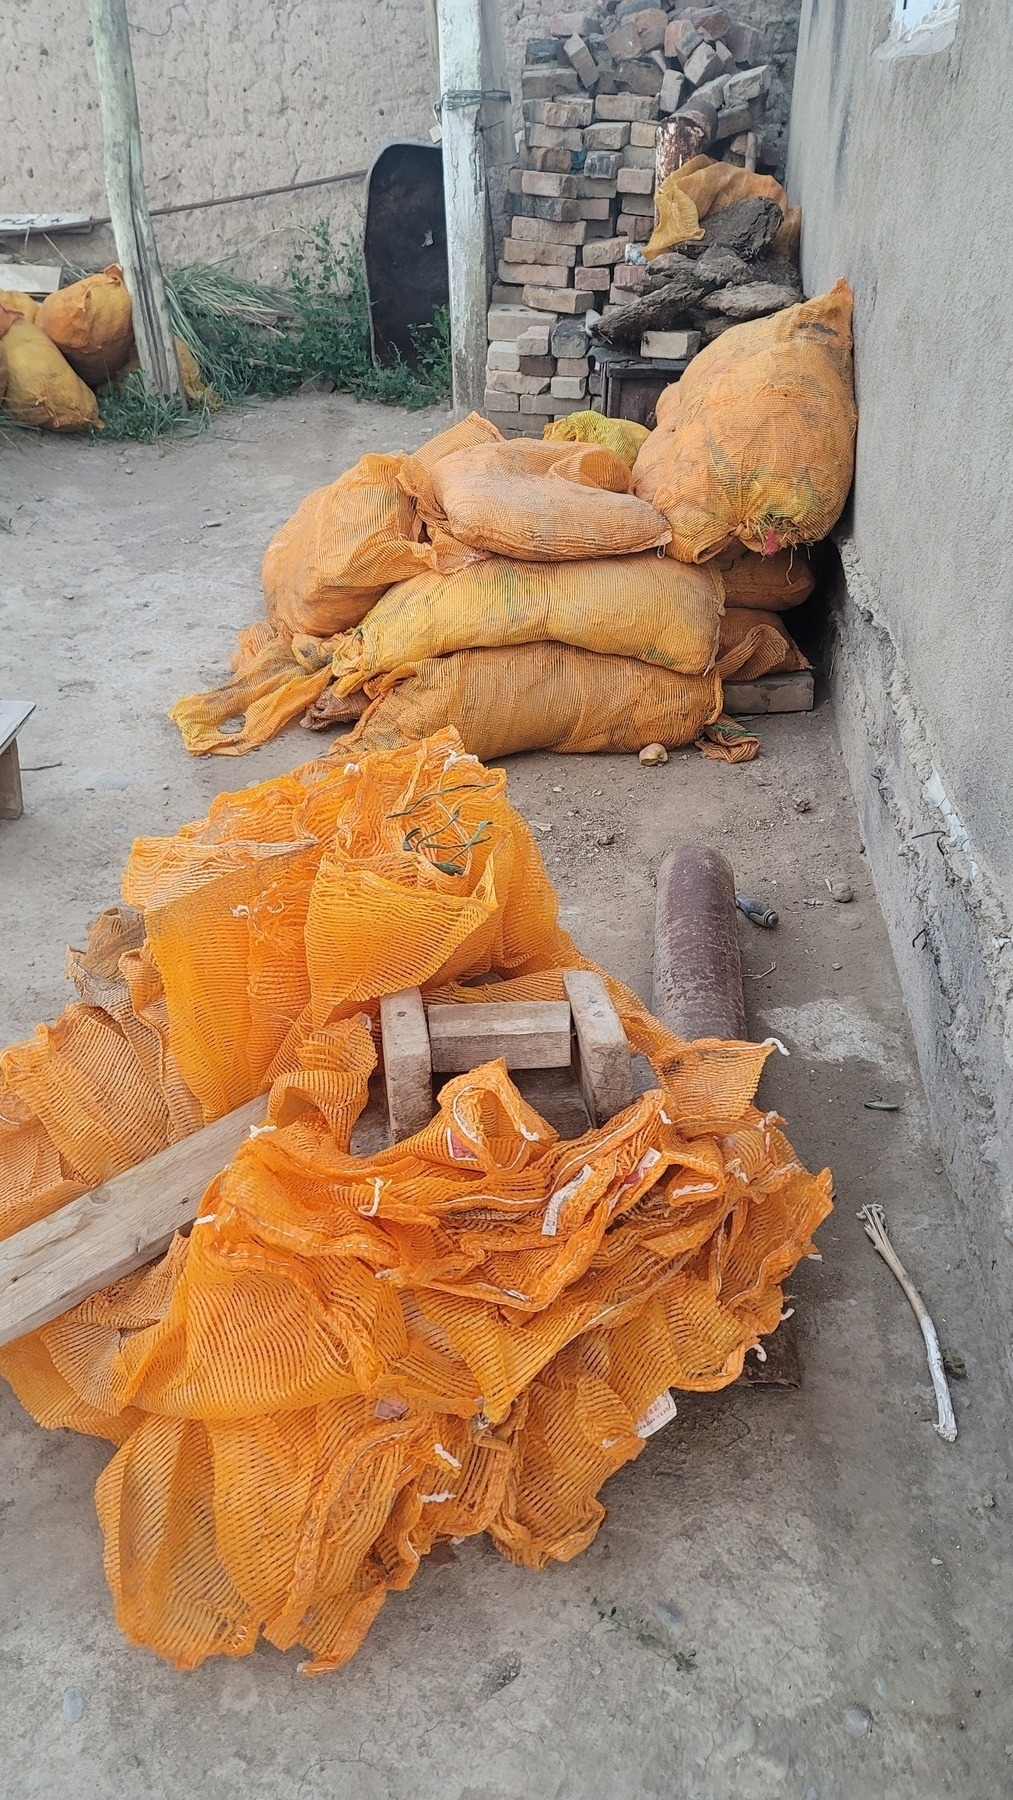 unfolded orange mesh bags in a pile under a plank of wood since it's windy here; in the background, bags filled with more bags that have yet to be unpacked